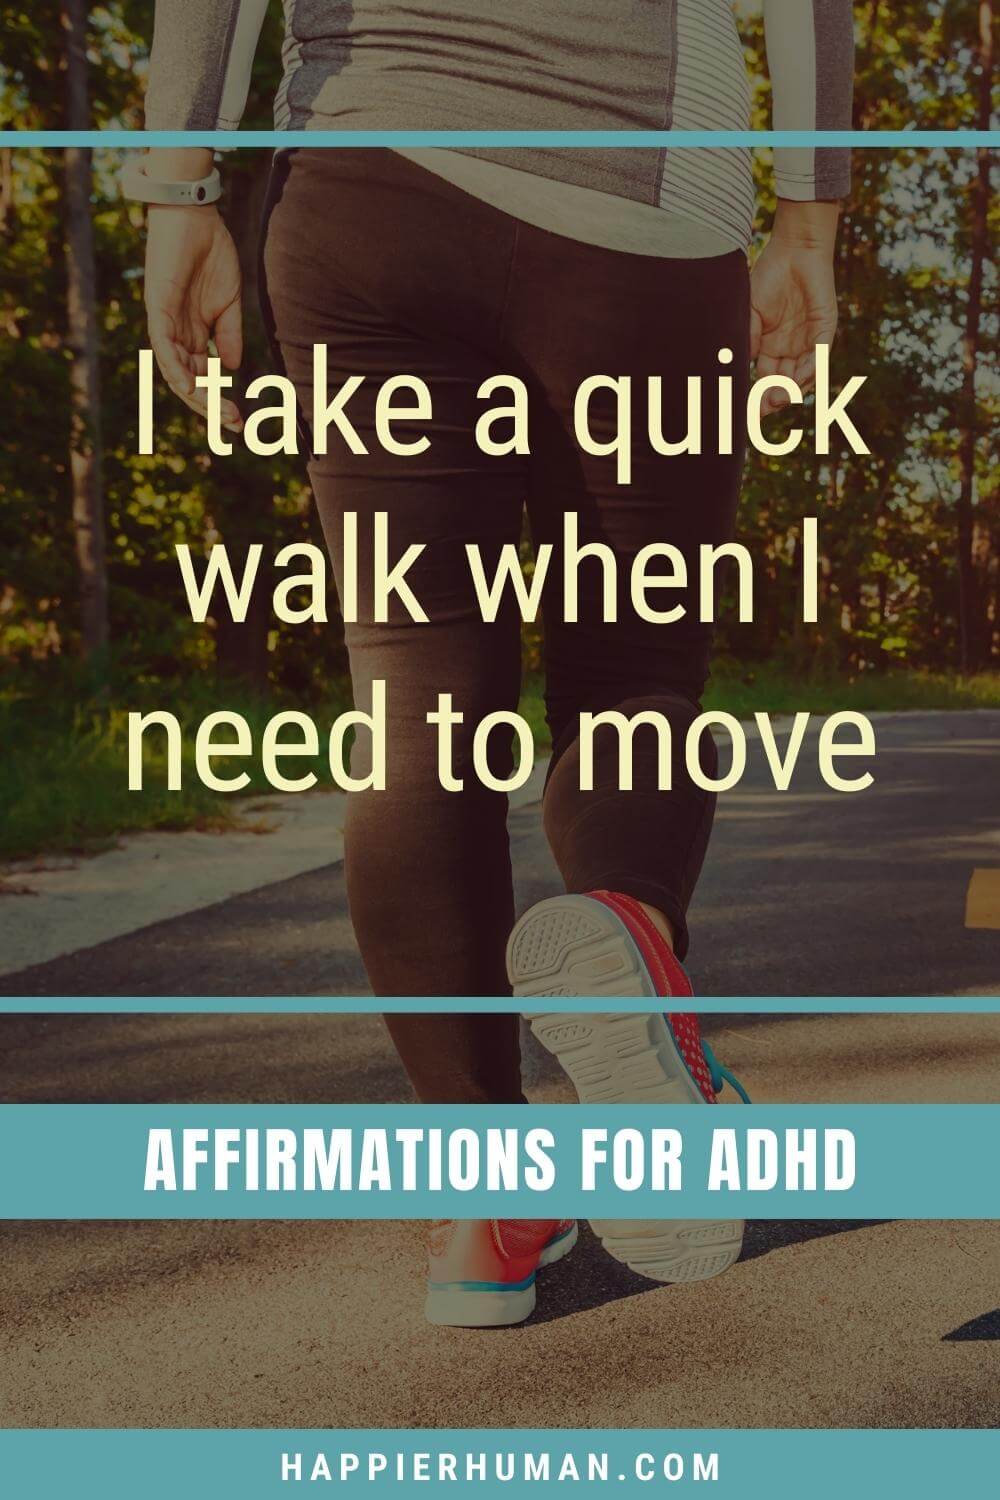 Affirmations For Adhd - I take a quick walk when I need to move | positive affirmations for kids printable | mantra for hyperactive child | adhd affirmations reddit